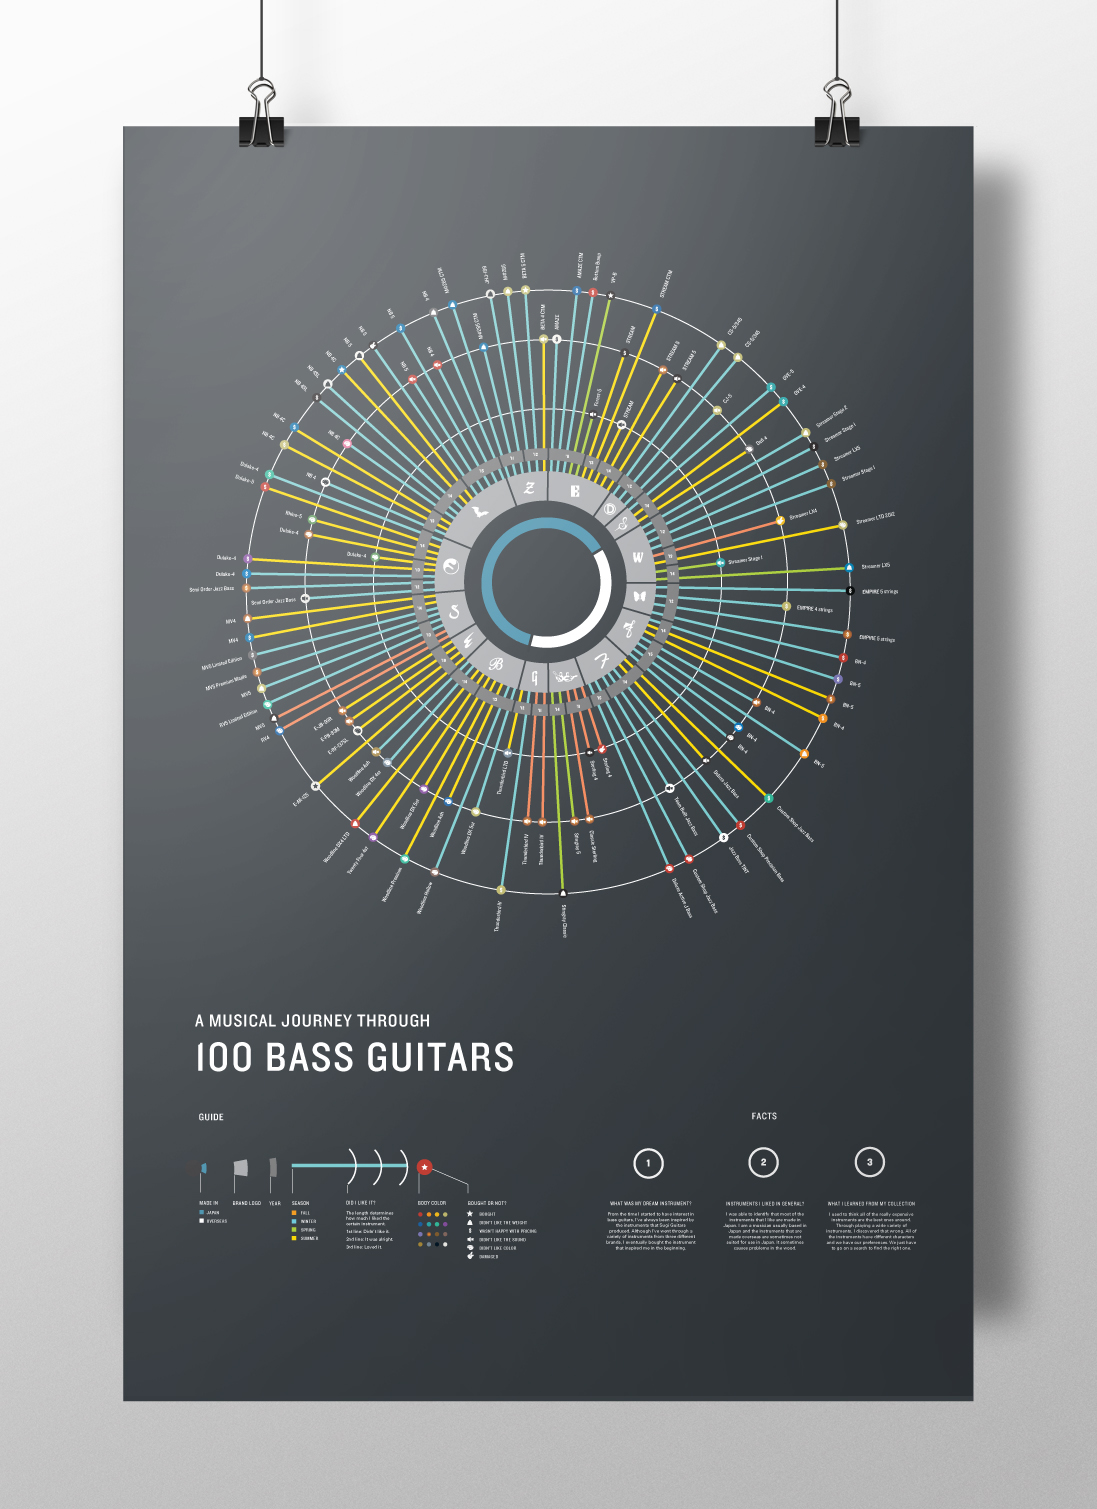 bass Bass Guitars guitars infographic poster instrument 100 THINGS Collection journey GD2015